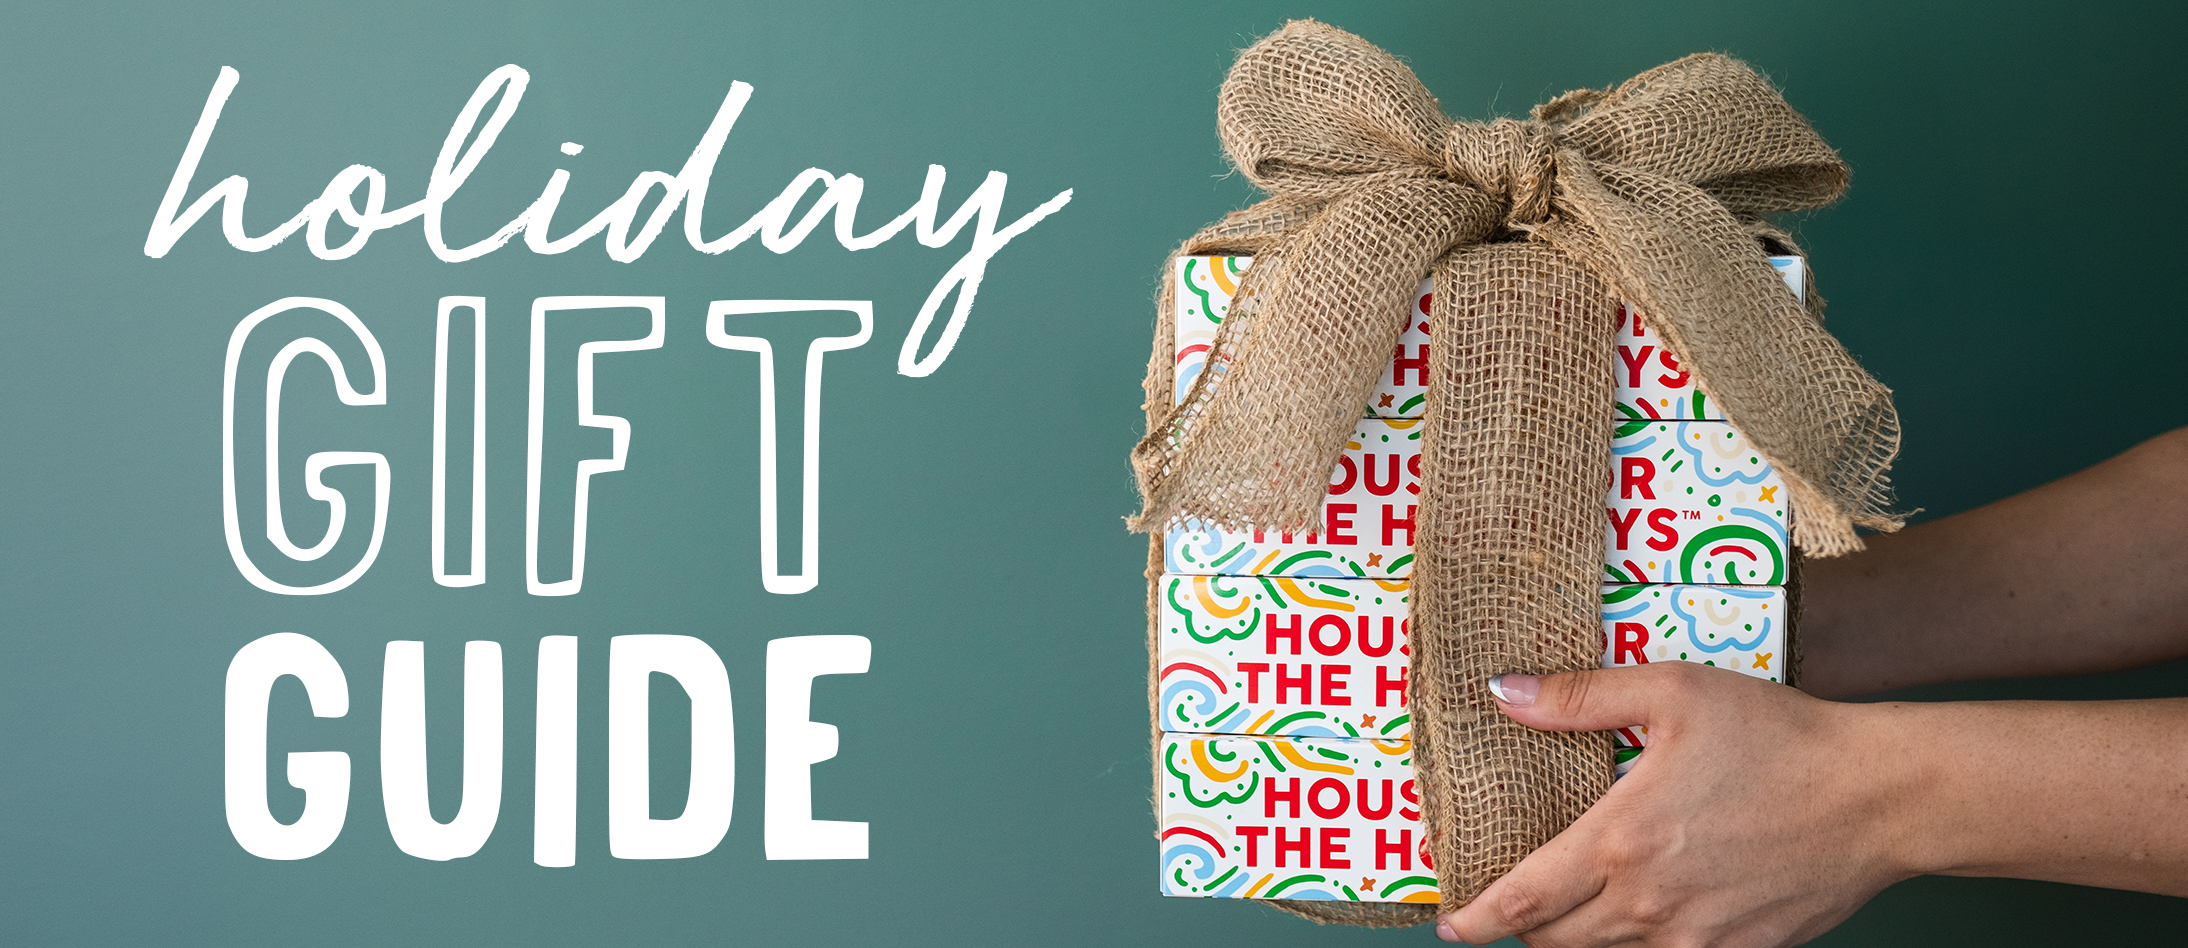 Lazy Dog Holiday Gift Guide